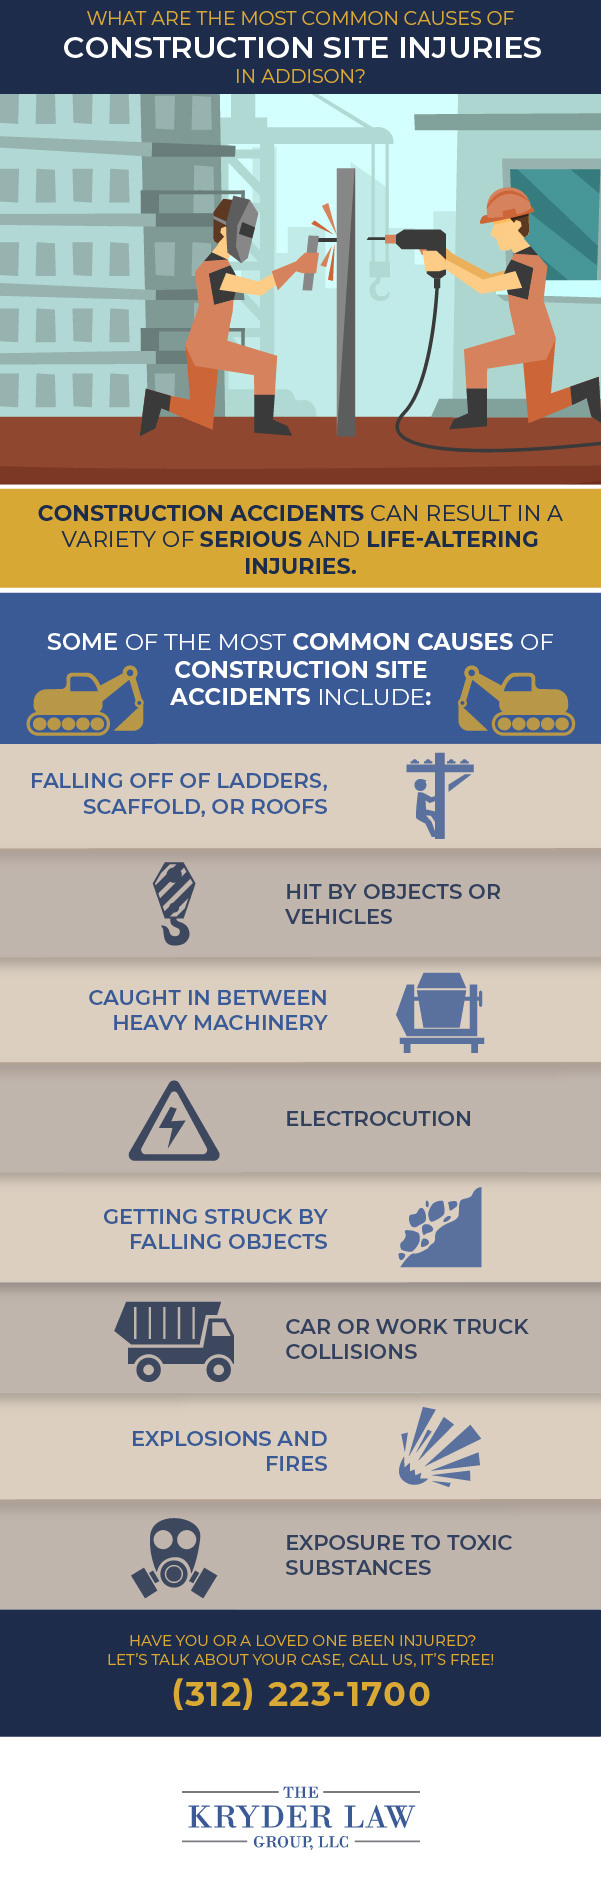 The Benefits of Hiring an Addison Construction Accident Lawyer Infographic